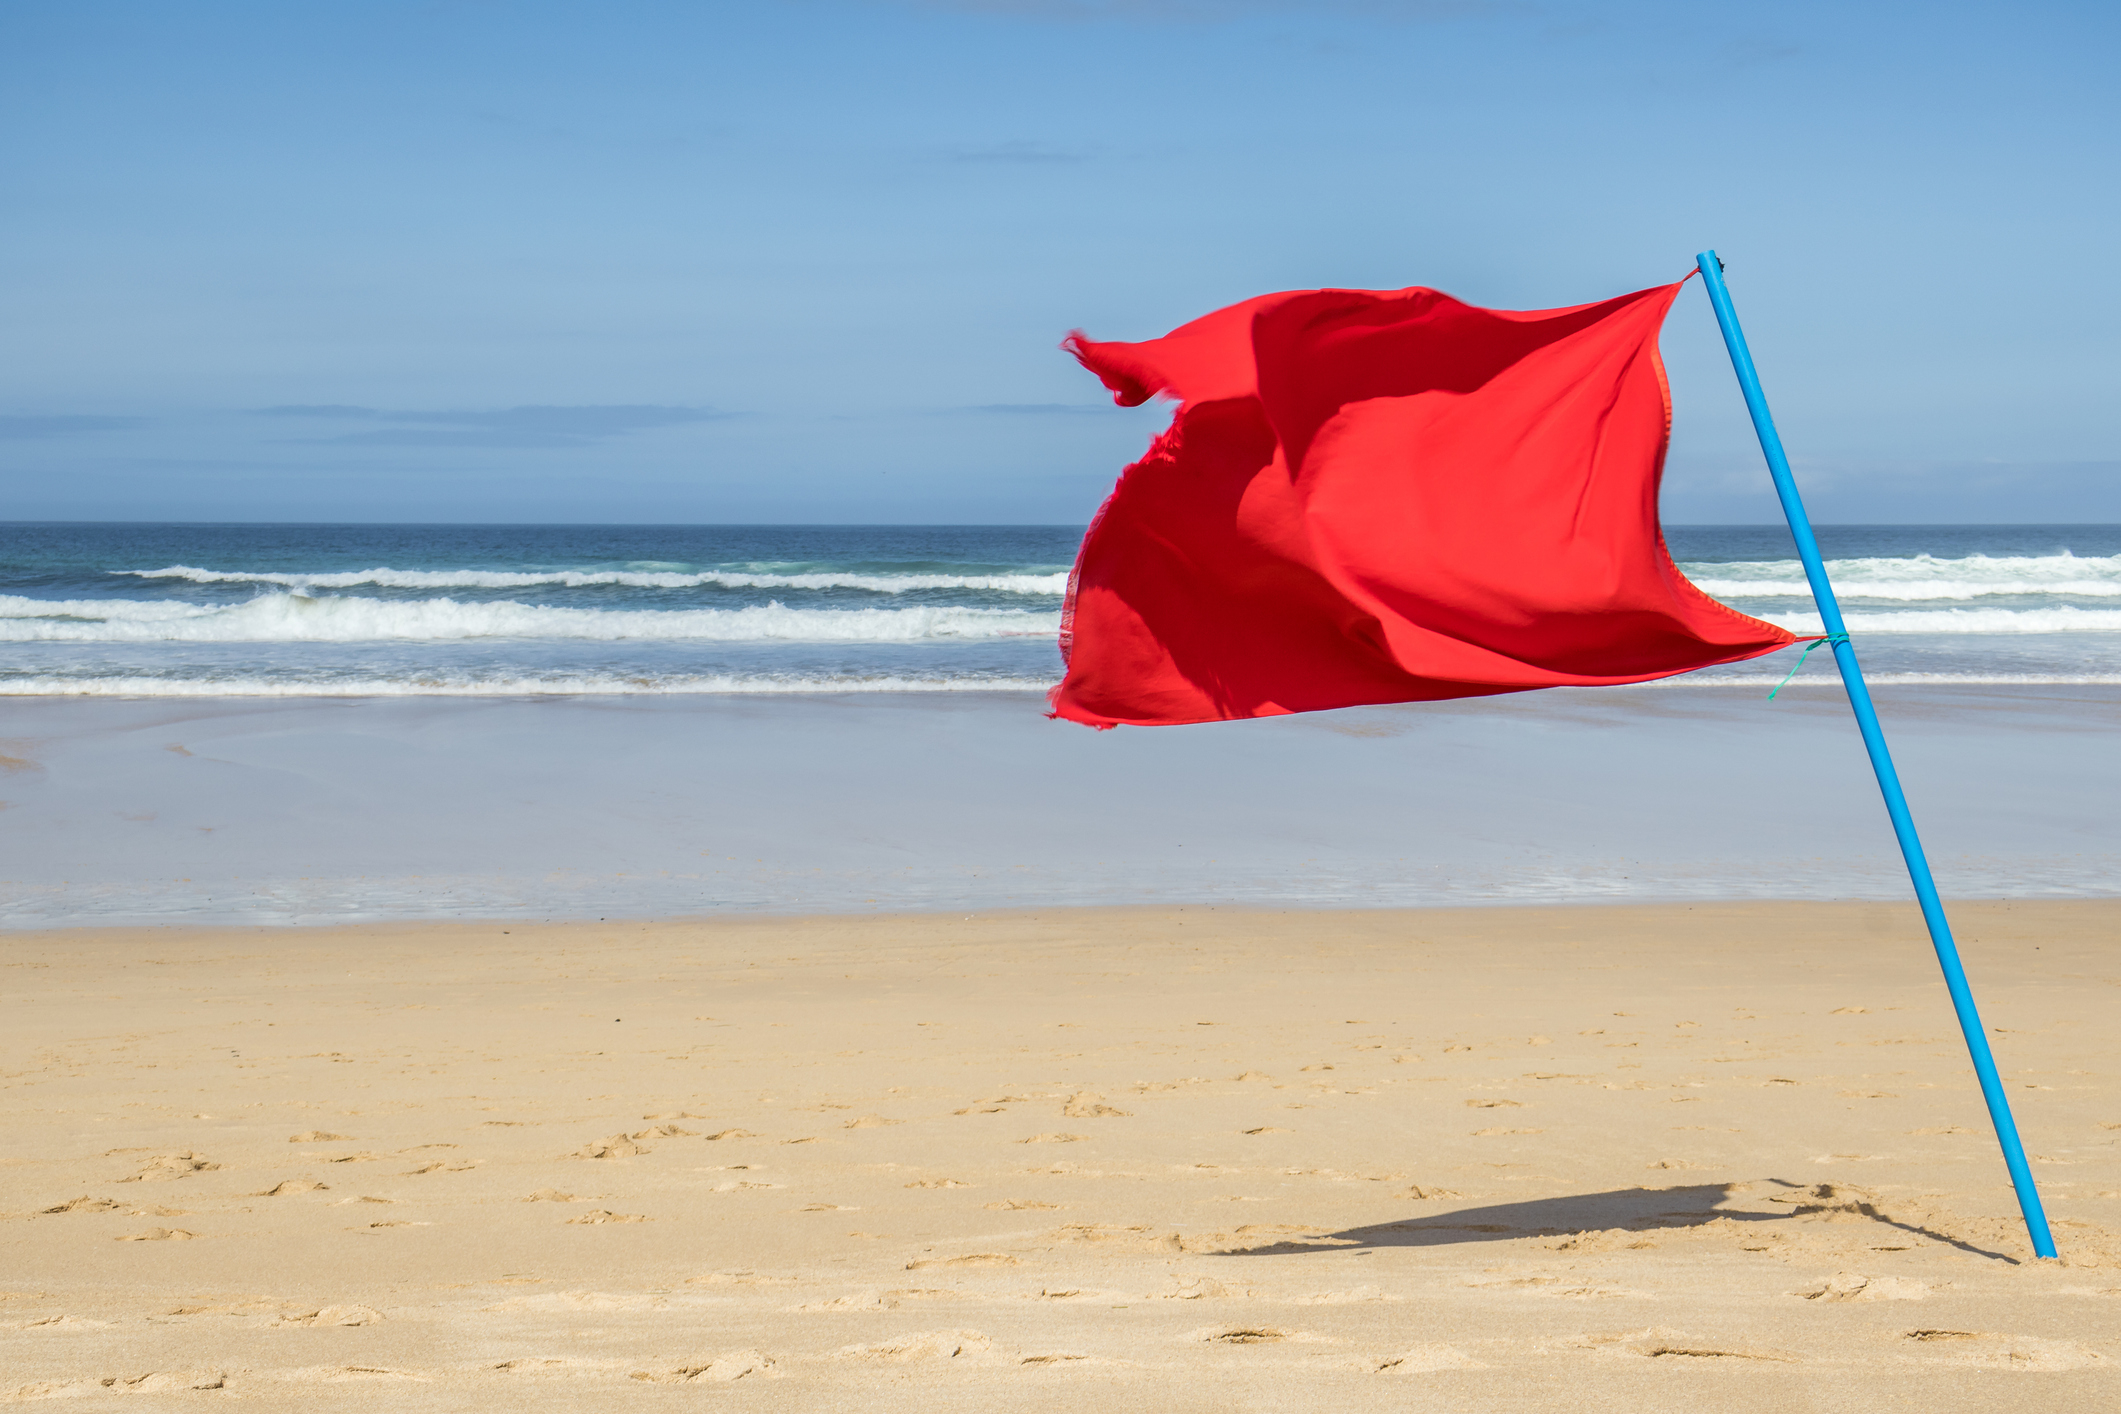 Red flag on a beach indicating a warning or danger, with waves in the background